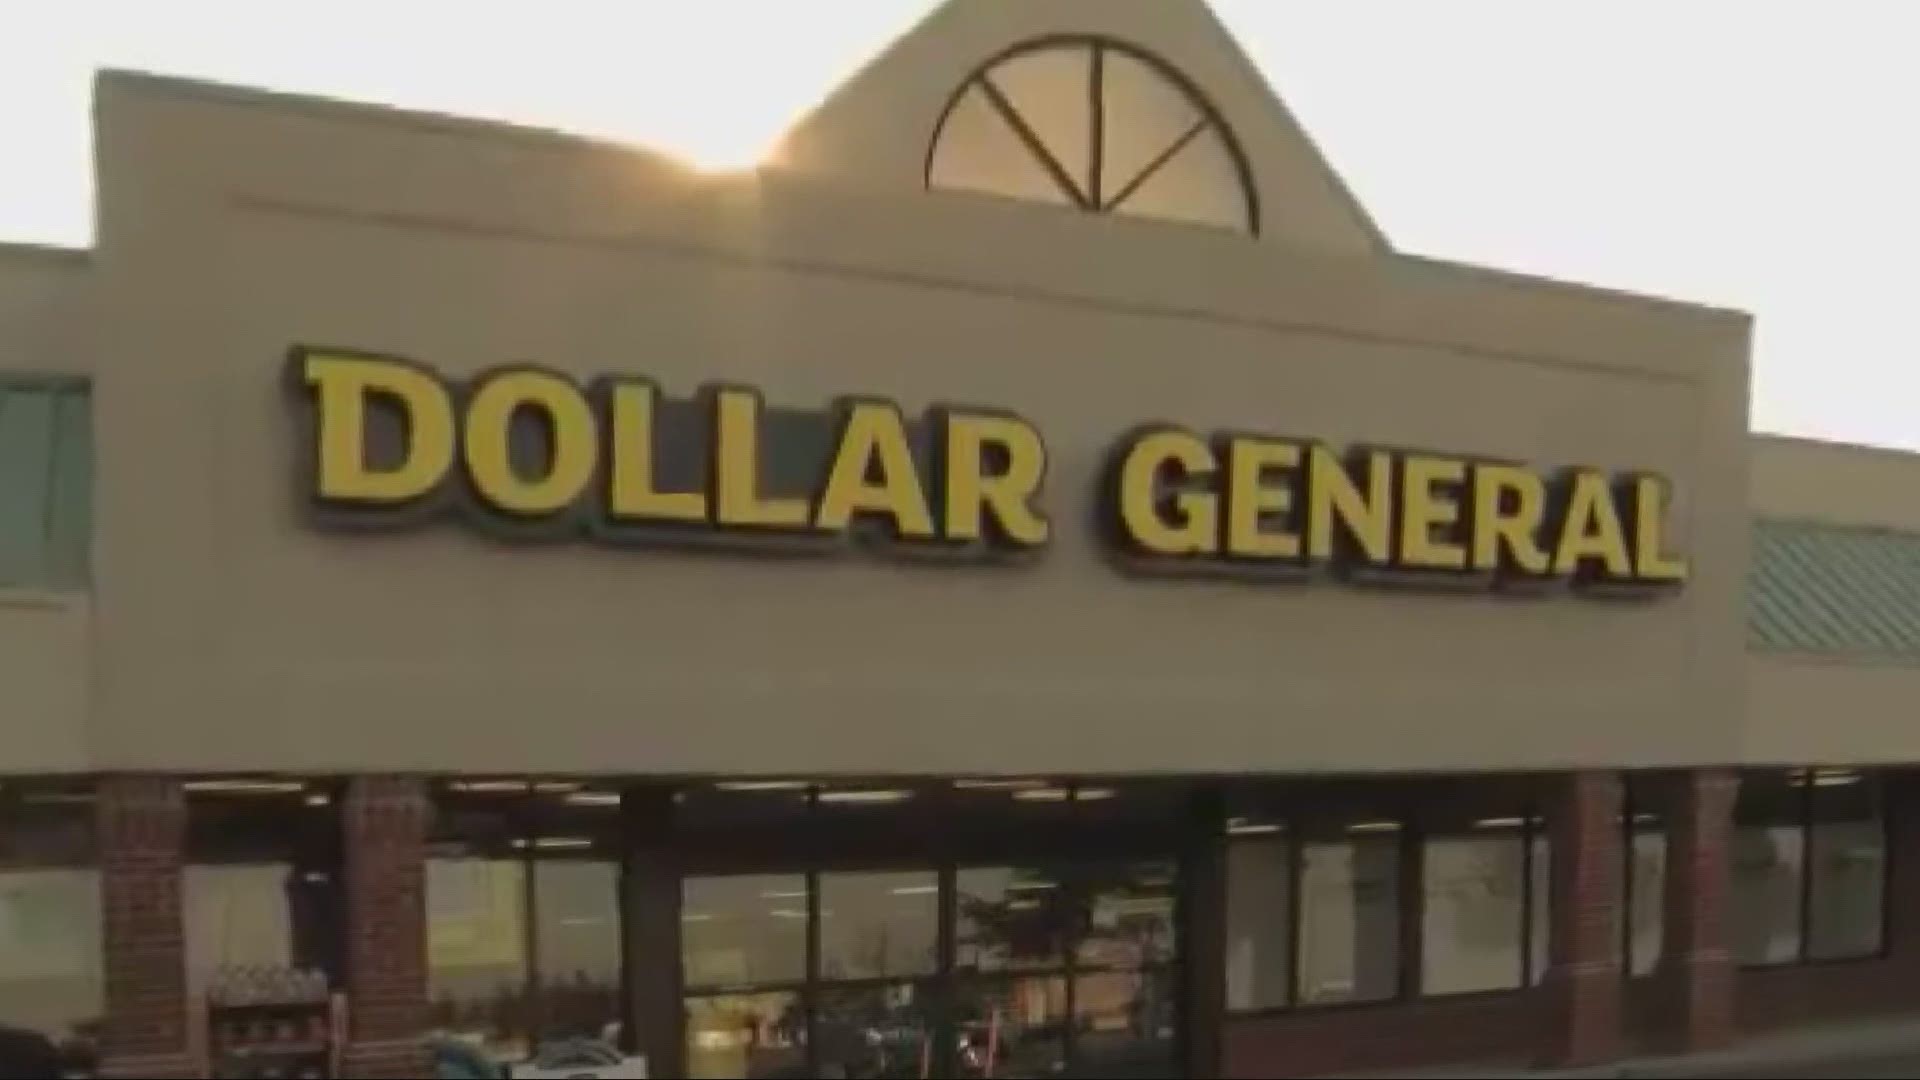 It's Money Monday.  If you are counting pennies you should check this out. Are Dollar Stores good?  Danielle Serino lets us know if they offer deals or duds.